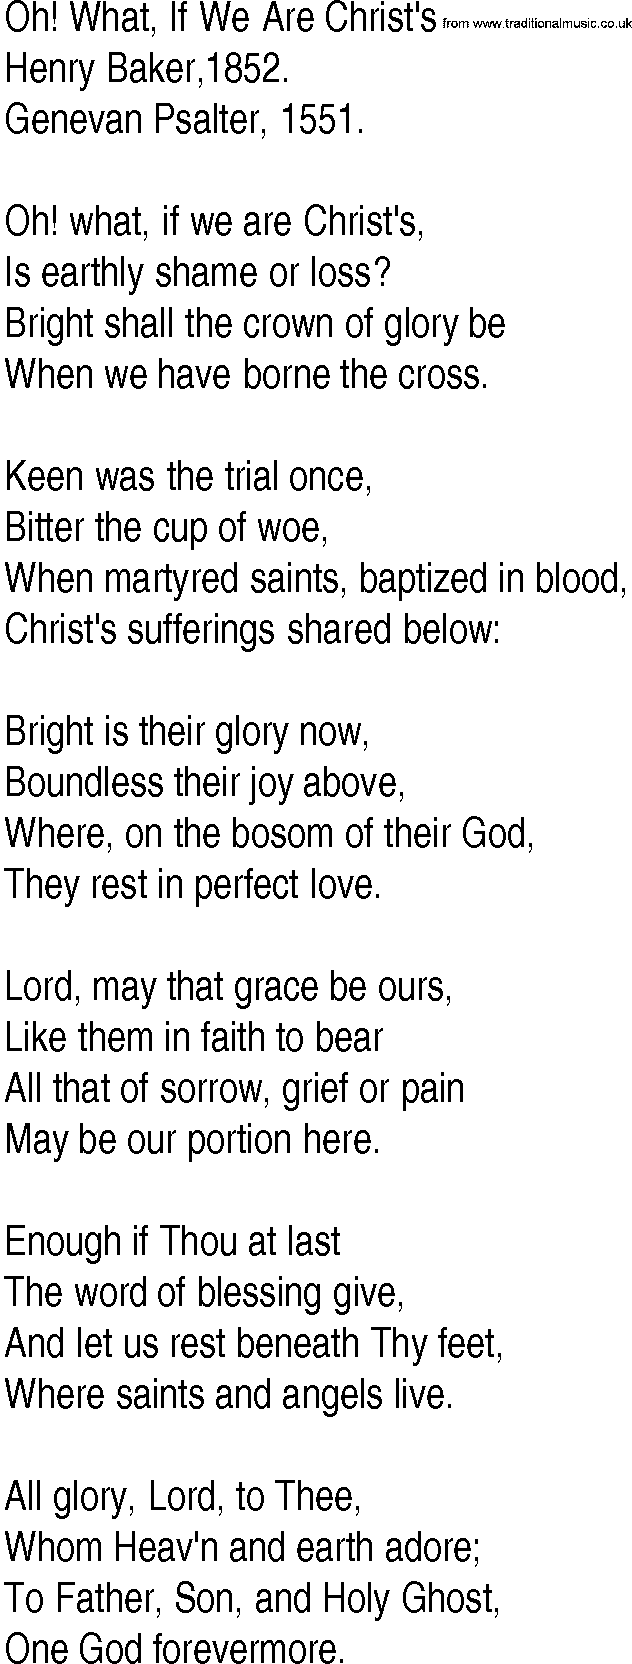 Hymn and Gospel Song: Oh! What, If We Are Christ's by Henry Baker lyrics